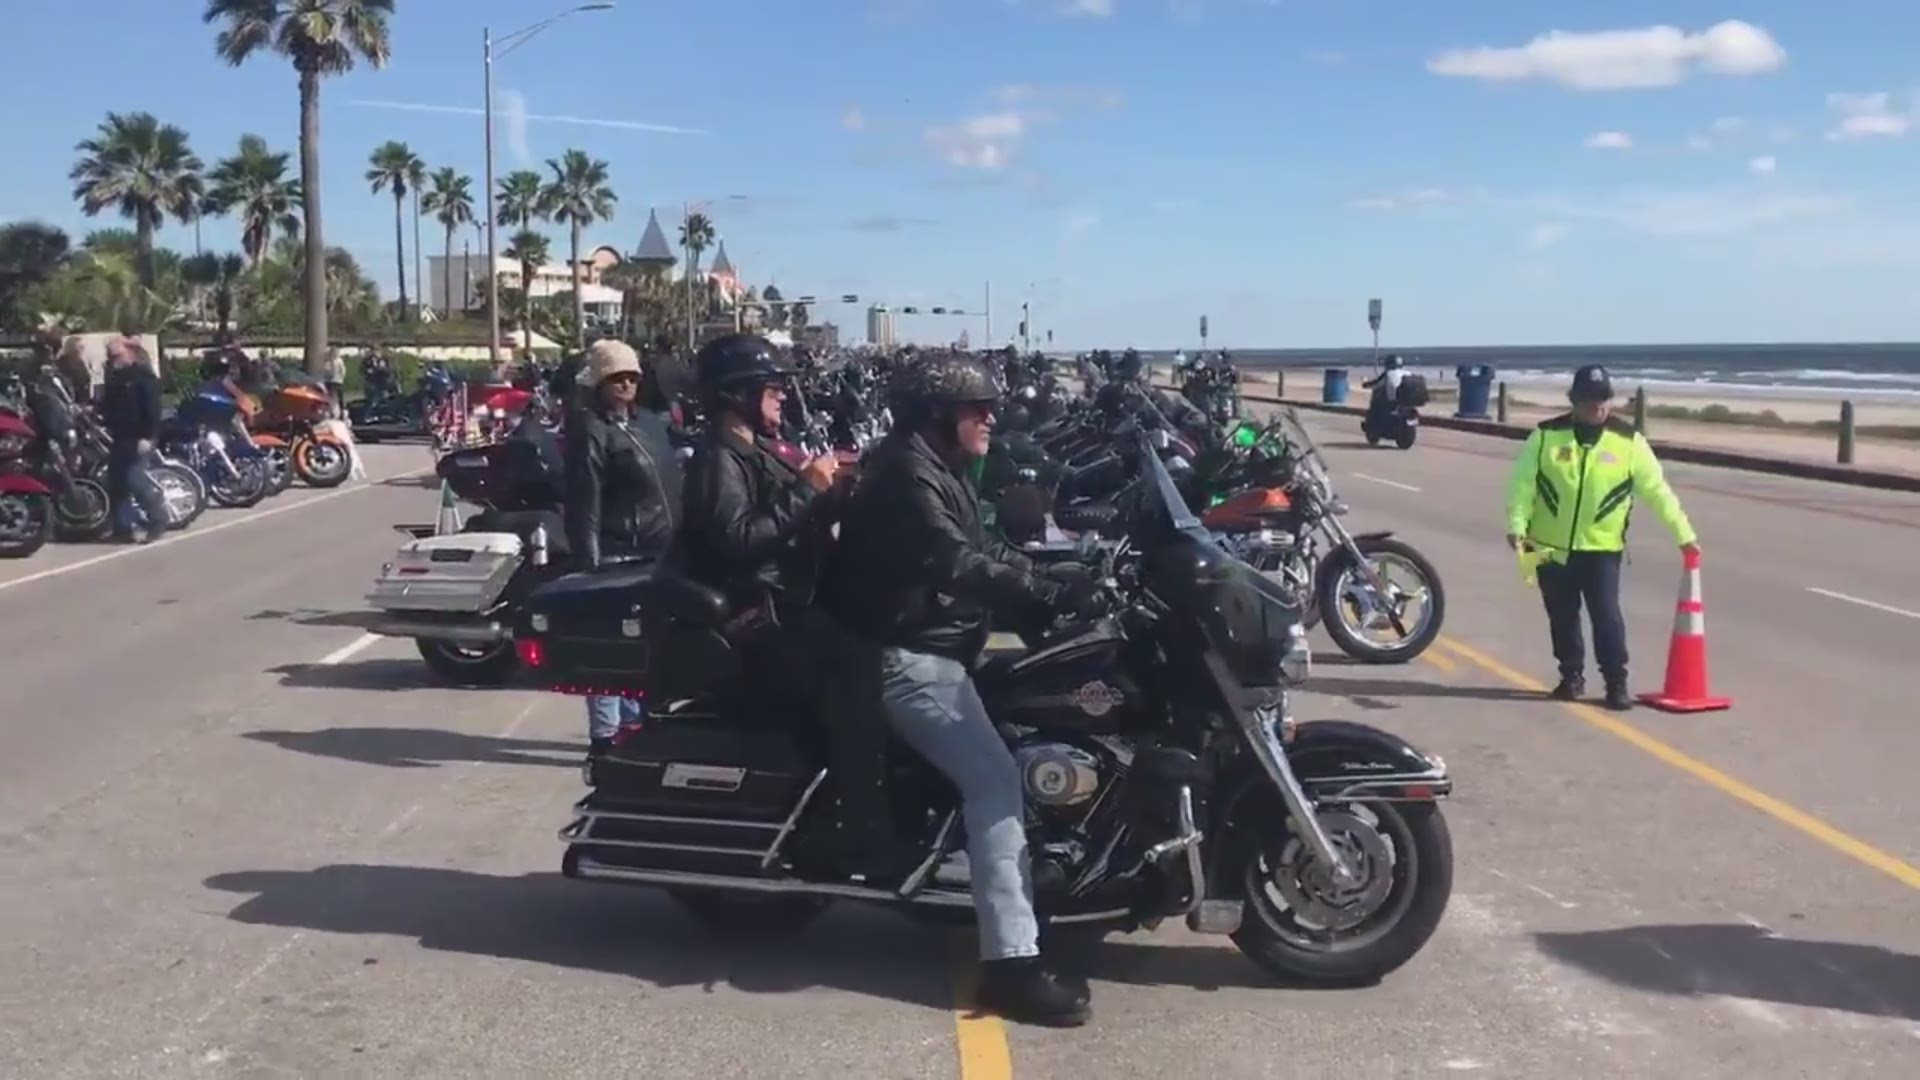 It's a busy weekend on the island as thousands of bikers head down for the Long Star Rally.